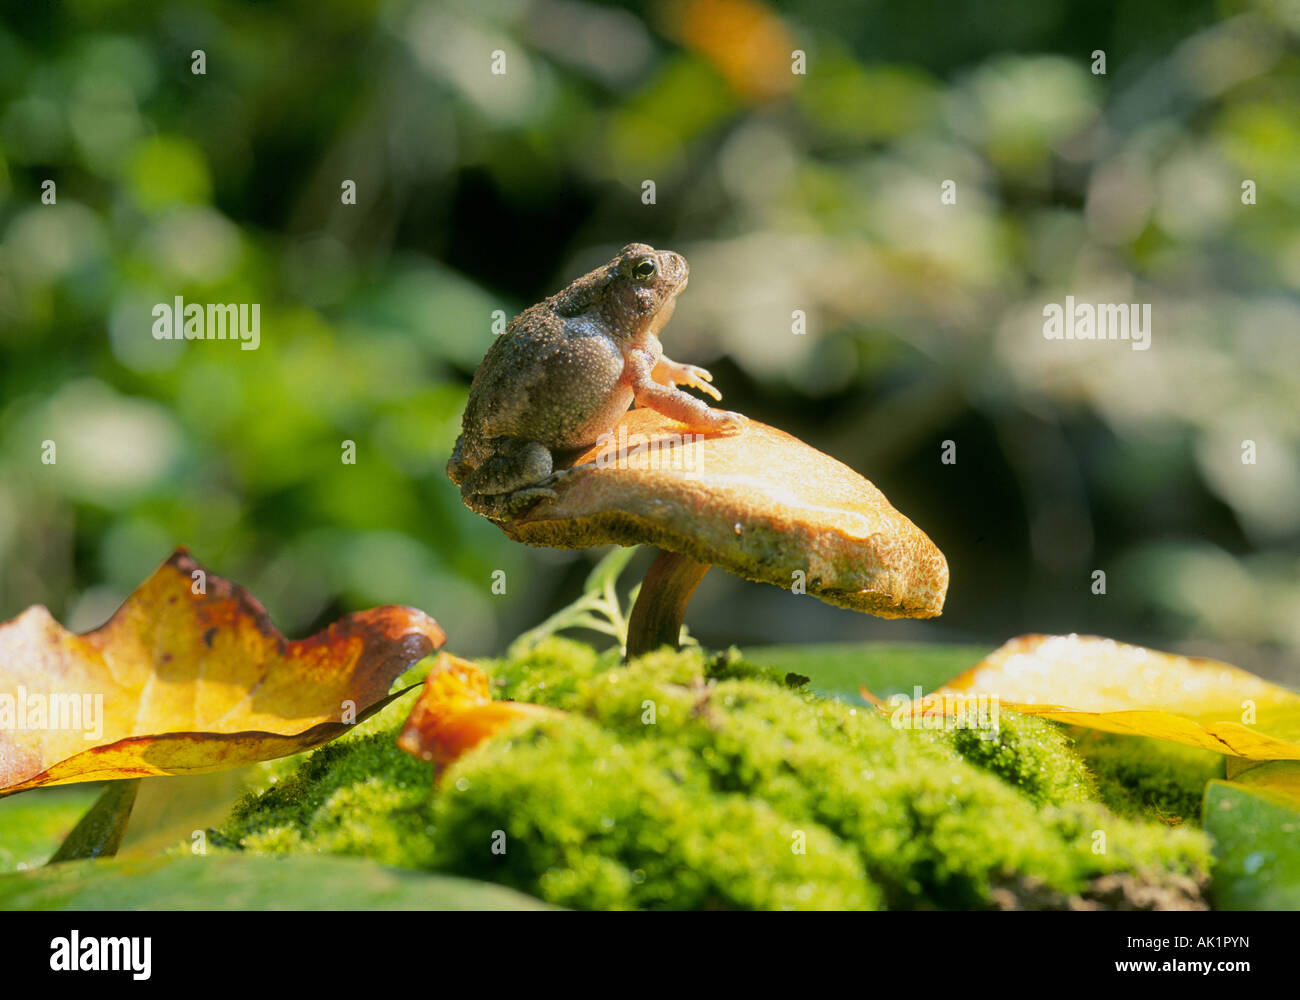 A toad perched on a mushroom in Hot Springs National Park in the Ouachita Mountains, Arkansas. Stock Photo